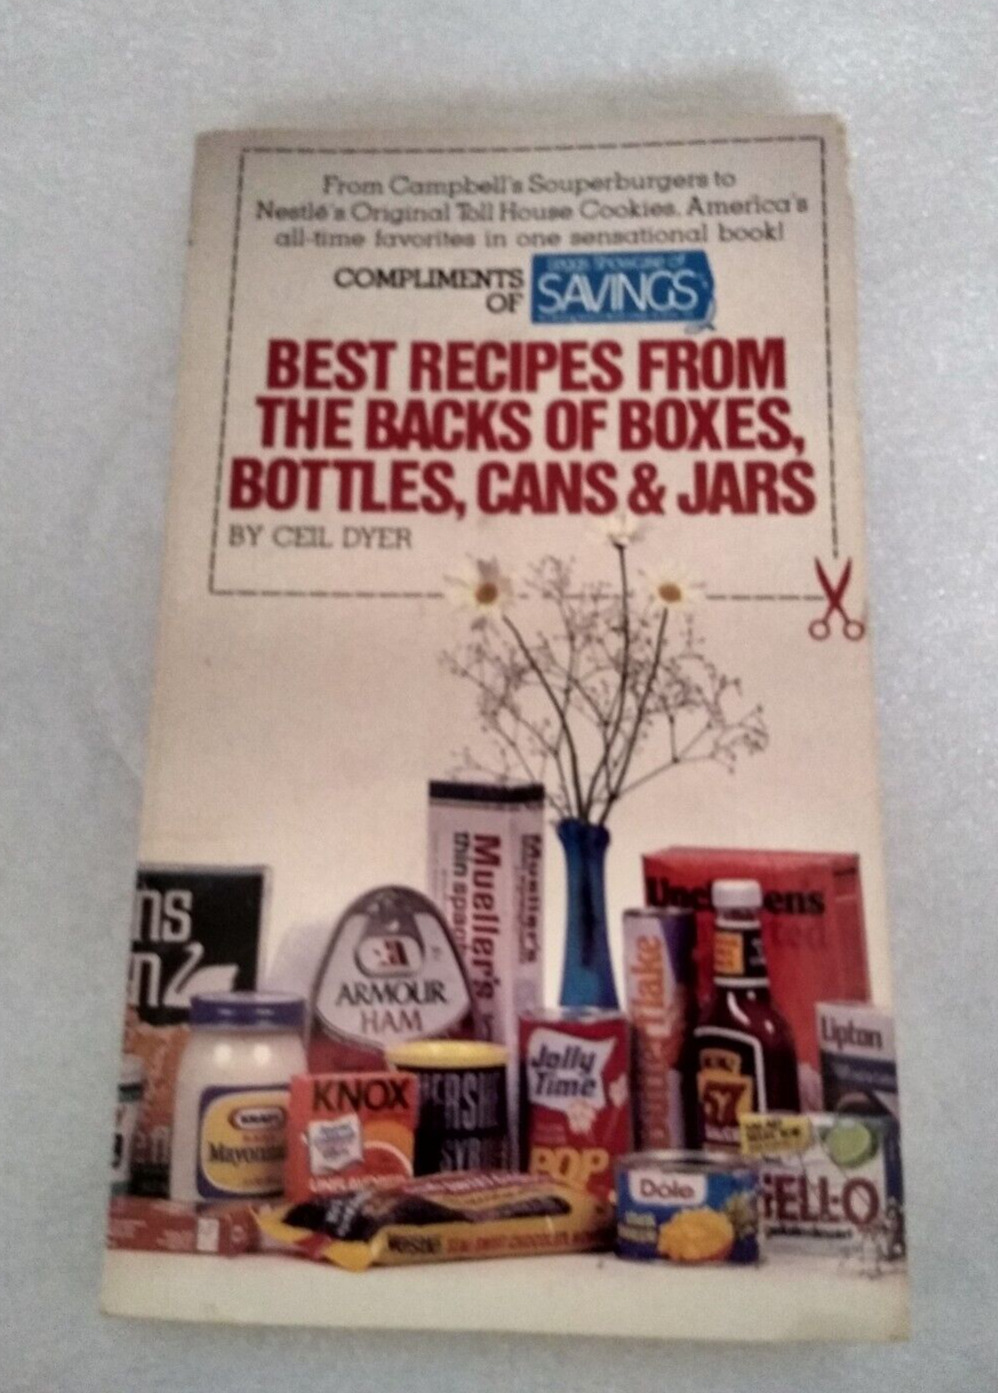 BEST RECIPES FROM THE BACKS OF BOXES, BOTTLES,CANS, & JARS   BY CEIL DYER  1979